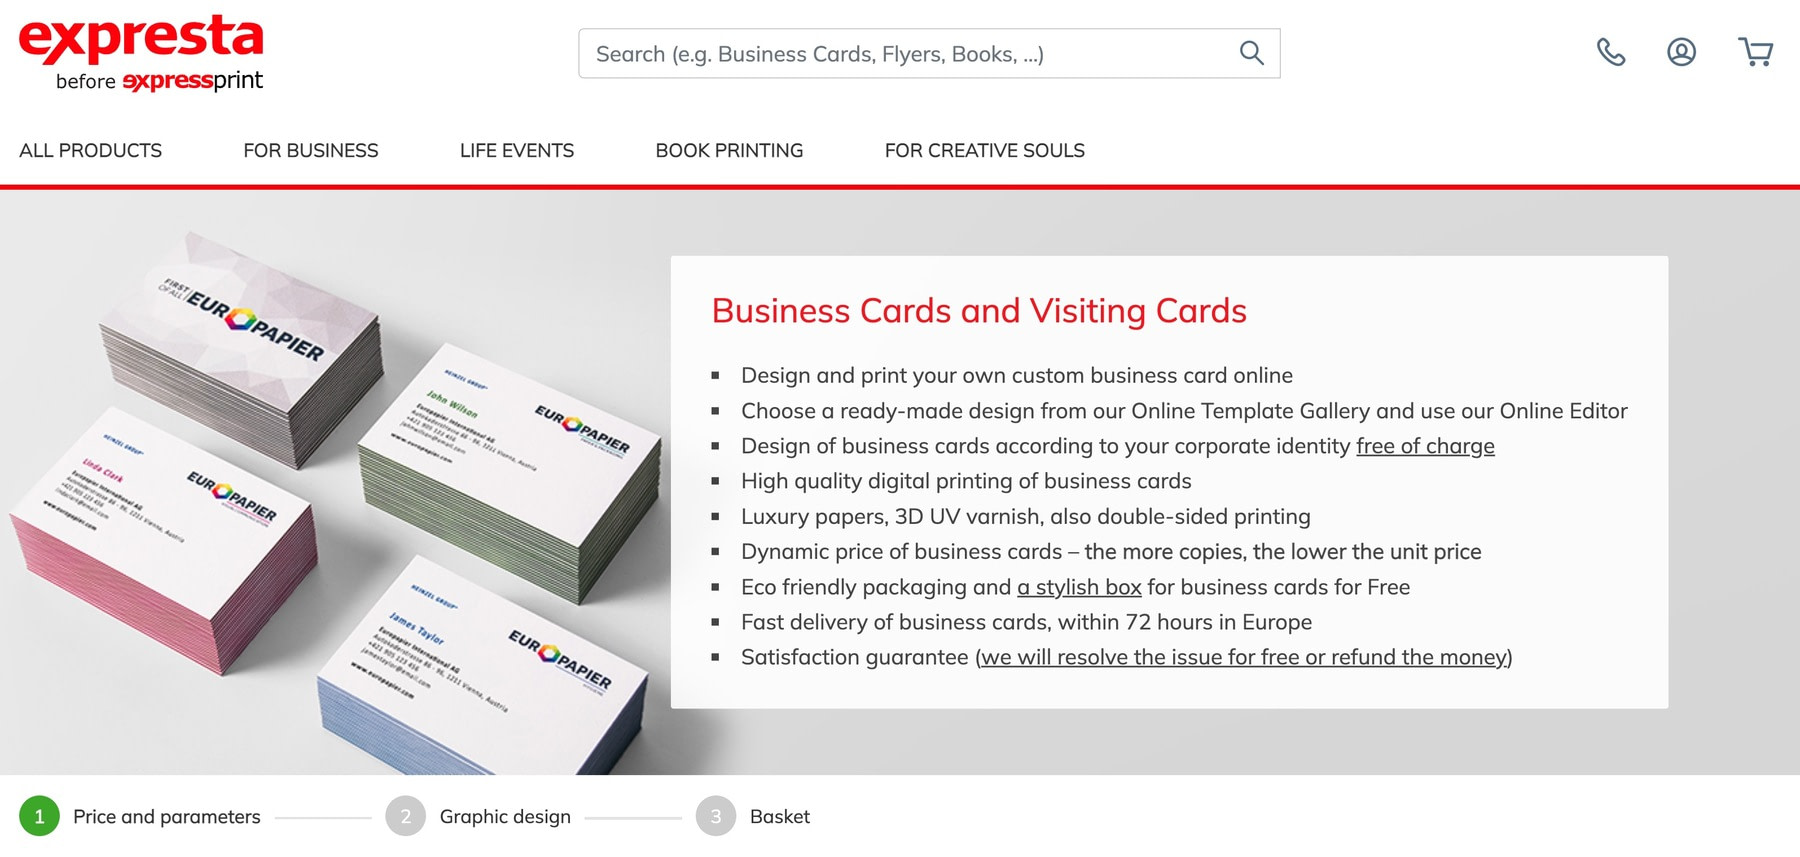 Expresta is one of the best business card printing services for people in Europe